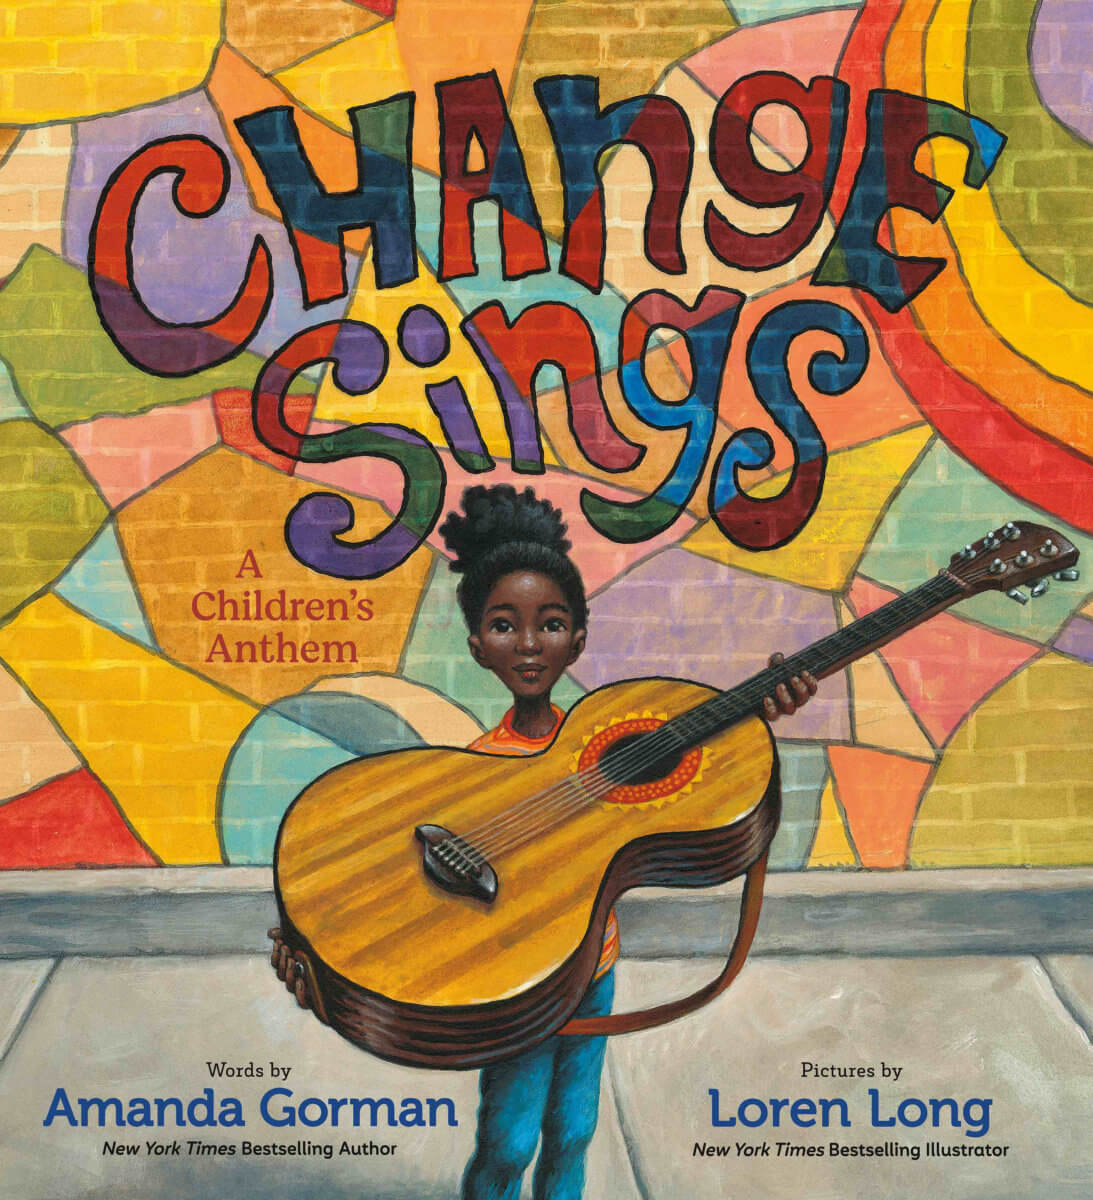 Book cover of “Change Sings: A Children’s Anthem” by Amanda Gorman